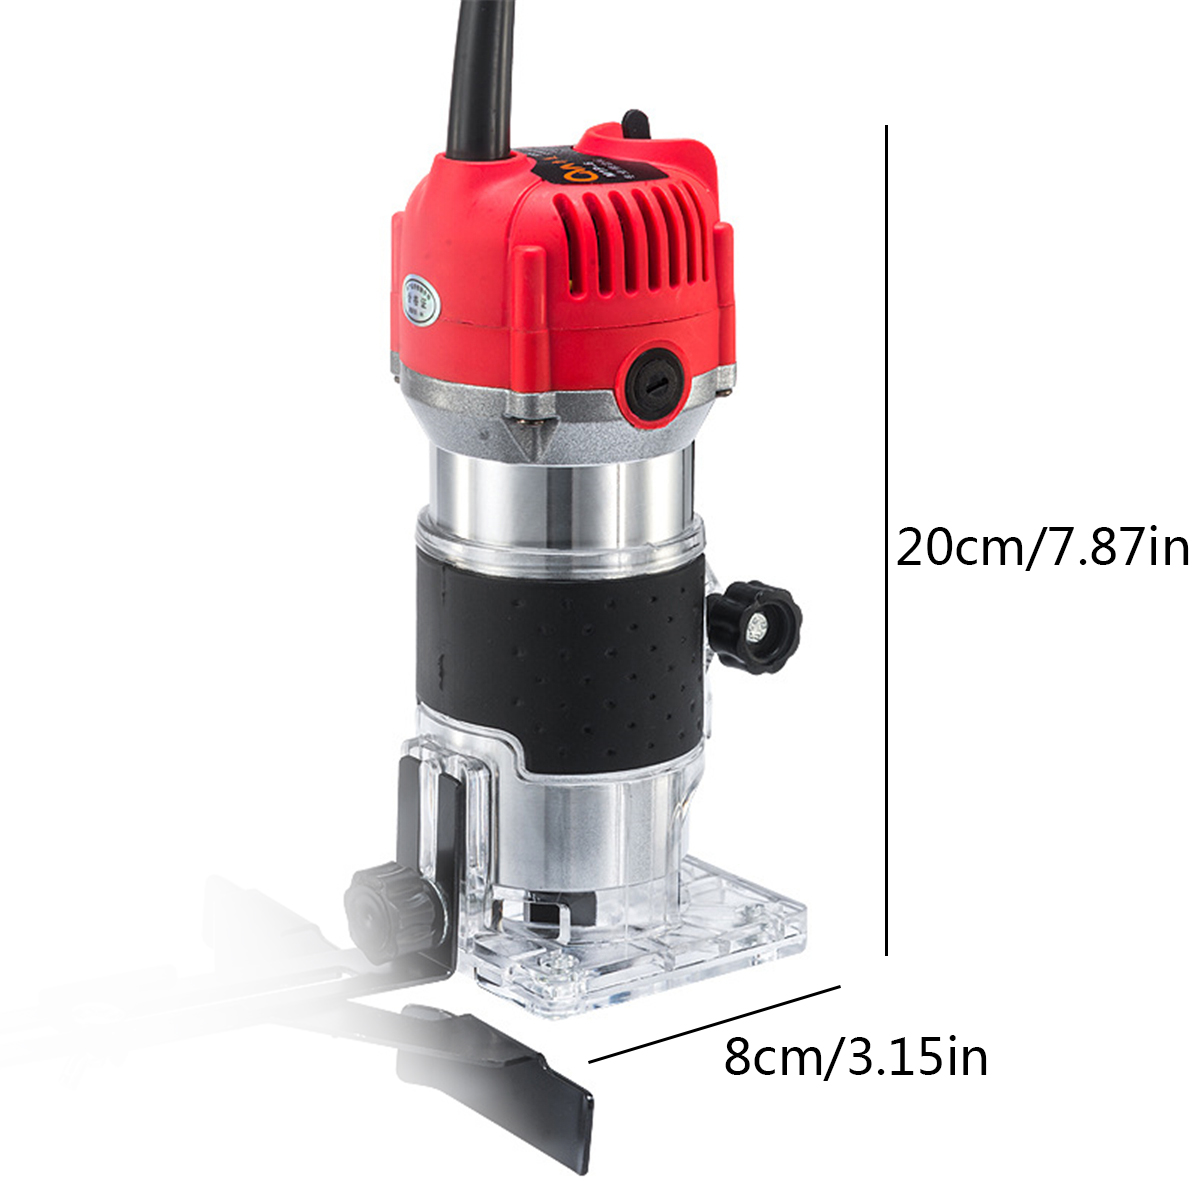 110V220V-2300W-Electric-Hand-Trimmer-Router-Wood-Laminate-Palm-Joiners-Working-Cutting-Machine-1735590-11